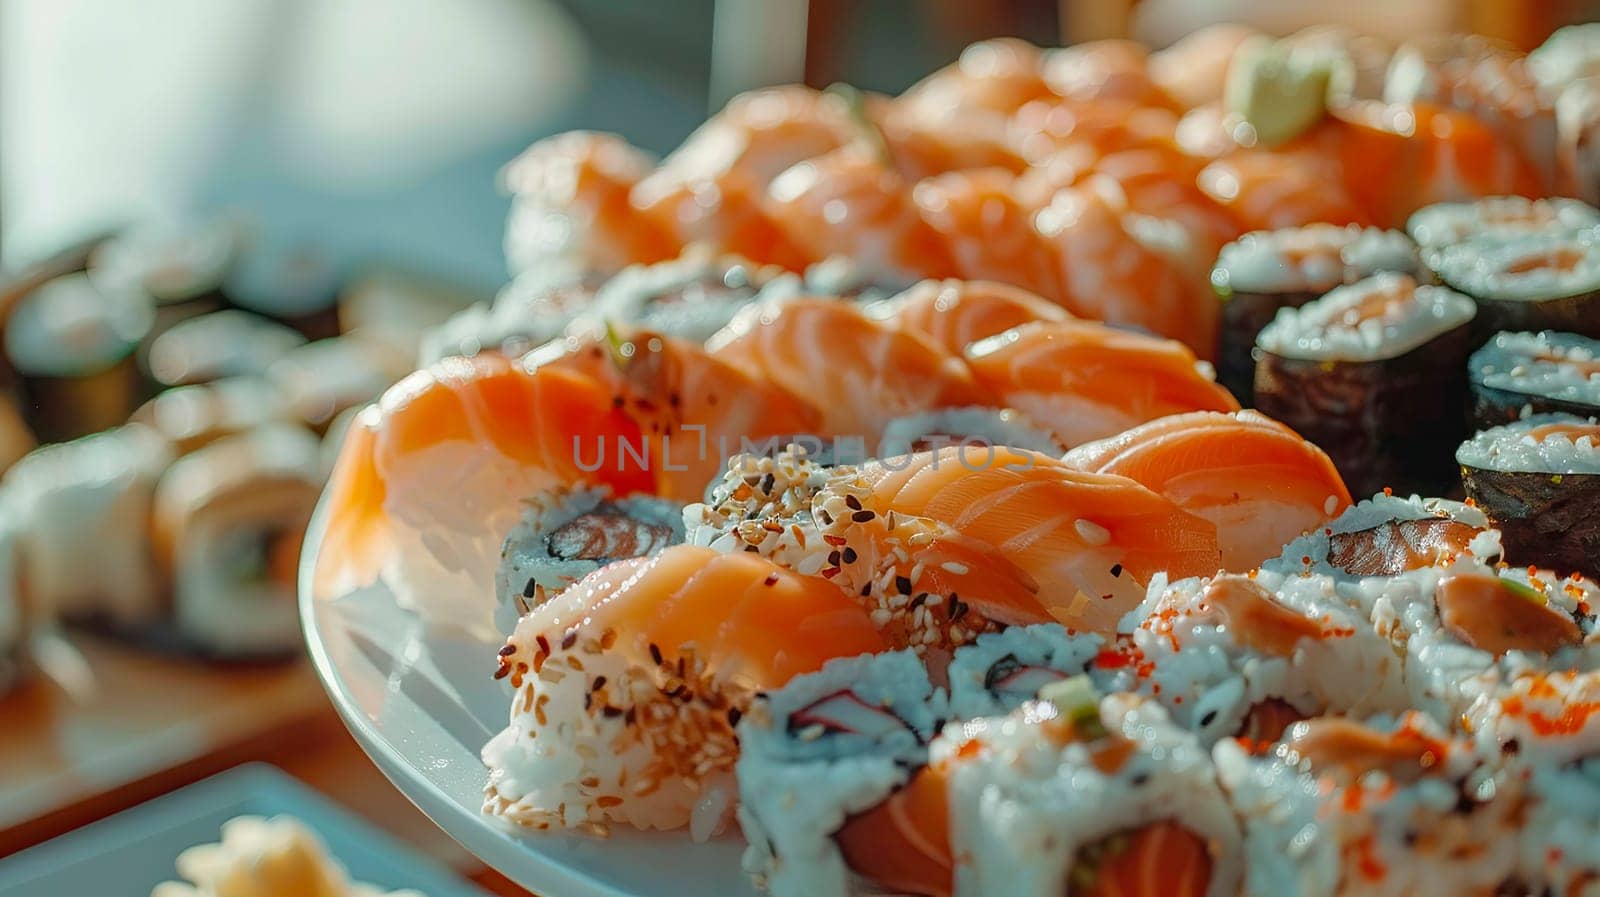 various sushi and rolls. selective focus. by yanadjana